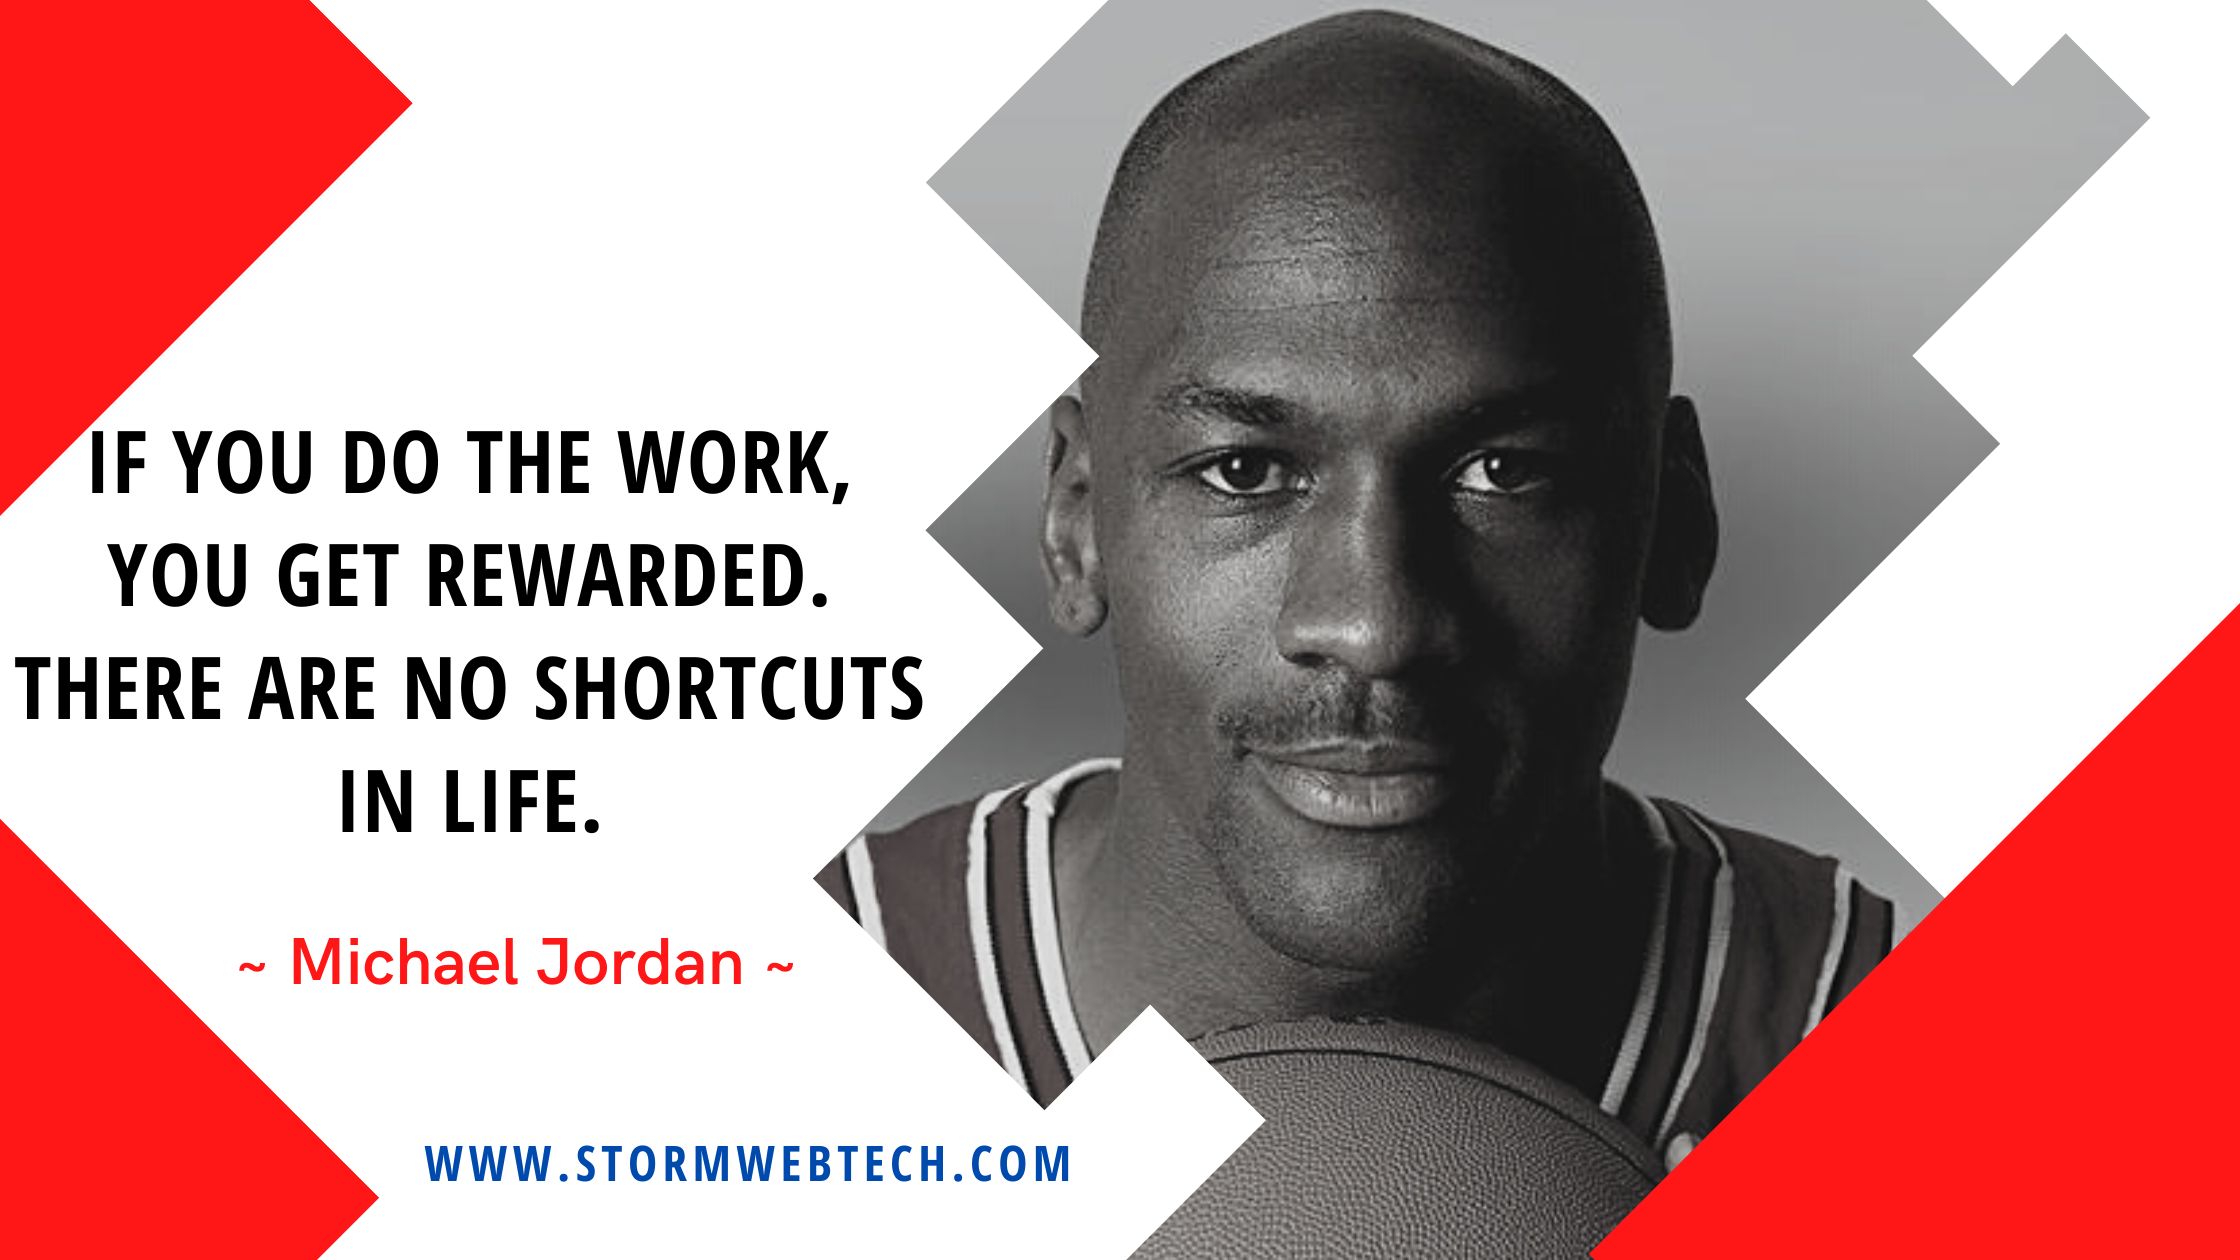 michael jordan quotes for motivation in life, motivational quotes of michael jordan, quotes by michael jordan, michael jordan motivational quotes